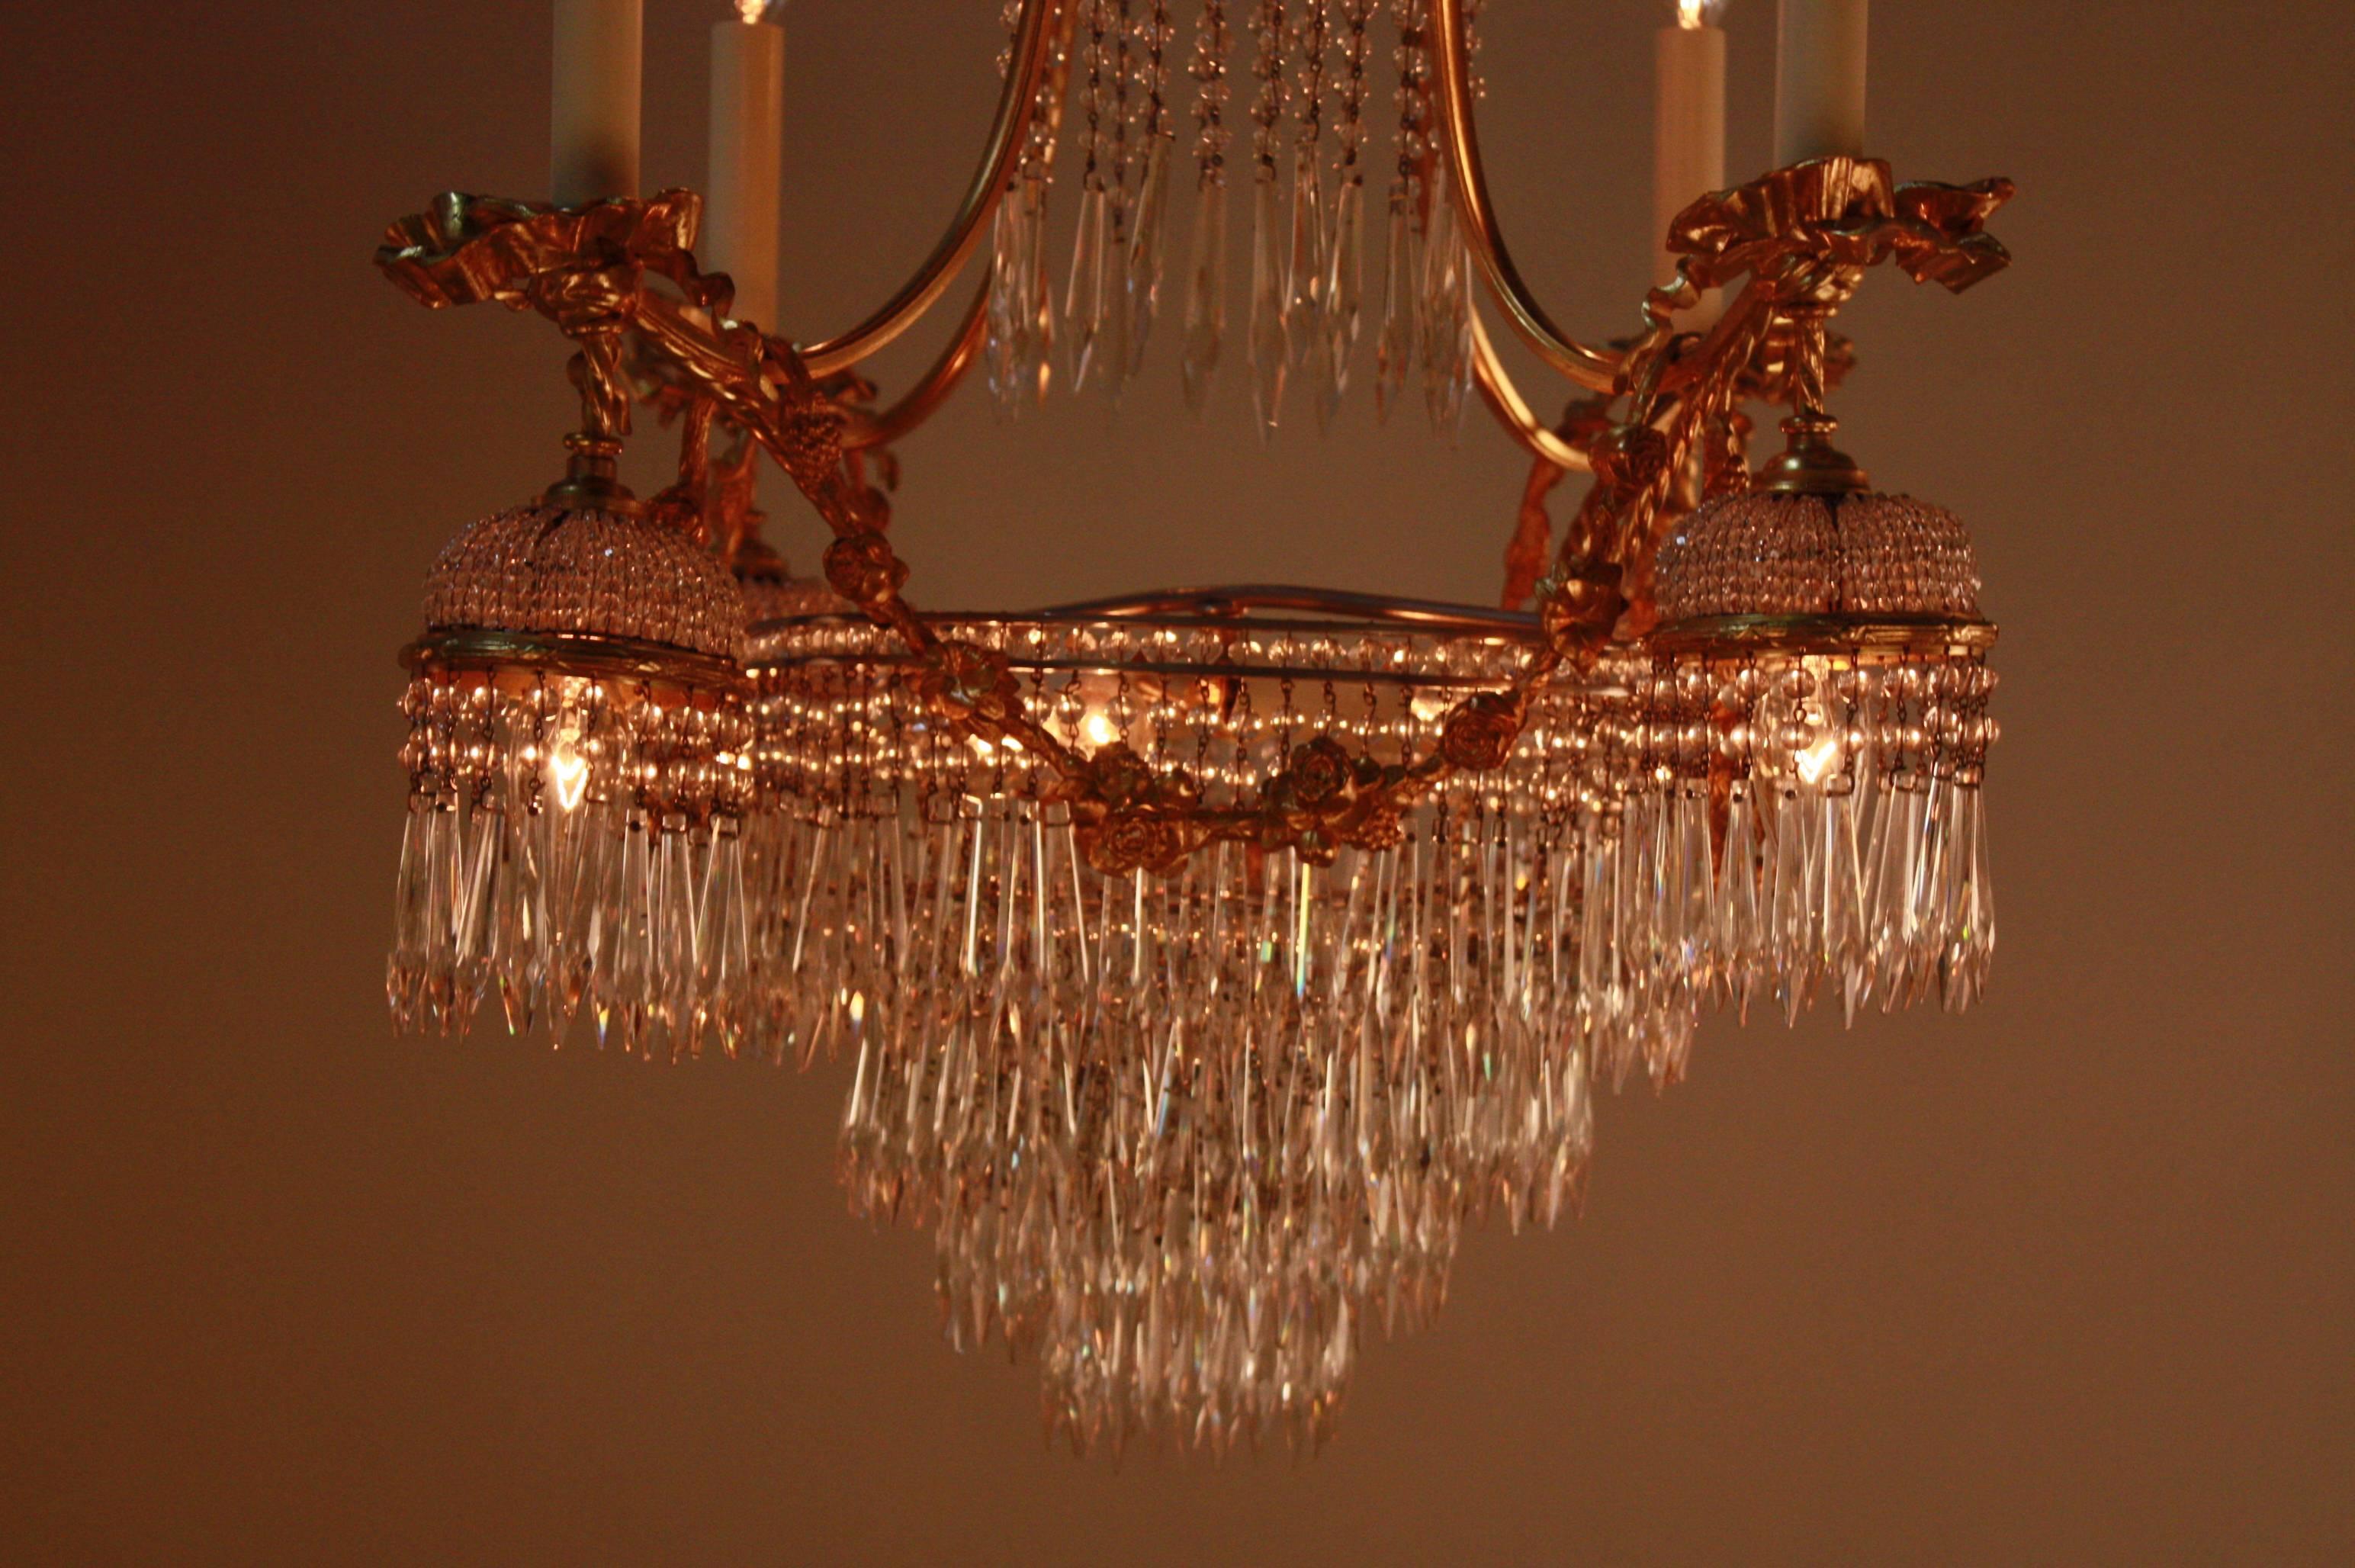 A superb bronze doré and crystal chandelier. Handcrafted beaded baskets with high quality sparkling crystals and elegant design doré bronze frame makes this chandelier very unique. Total of 13 lights.